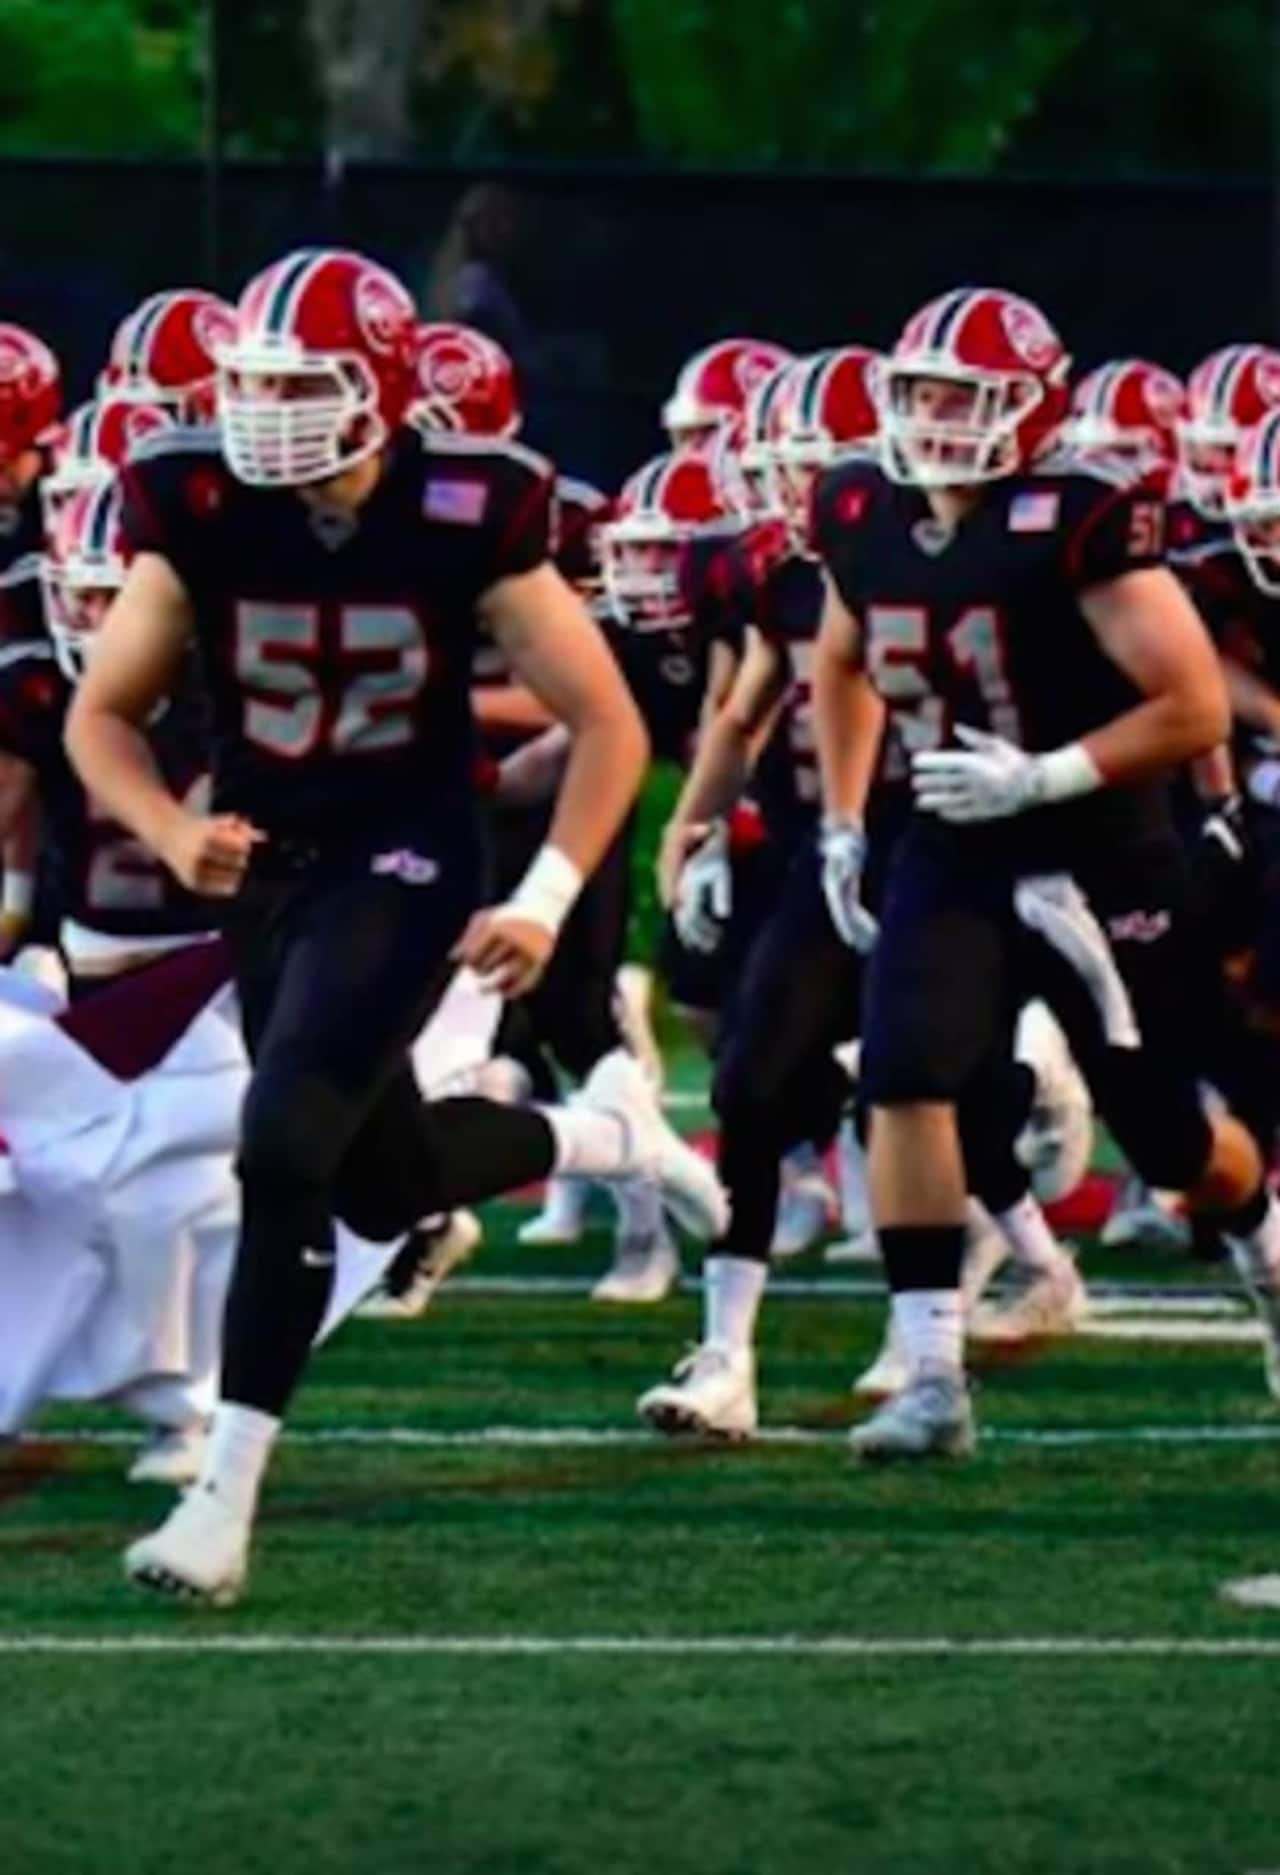 The New Canaan Rams shut out the Darien Blue Wave in the annual Turkey Bowl matchup.